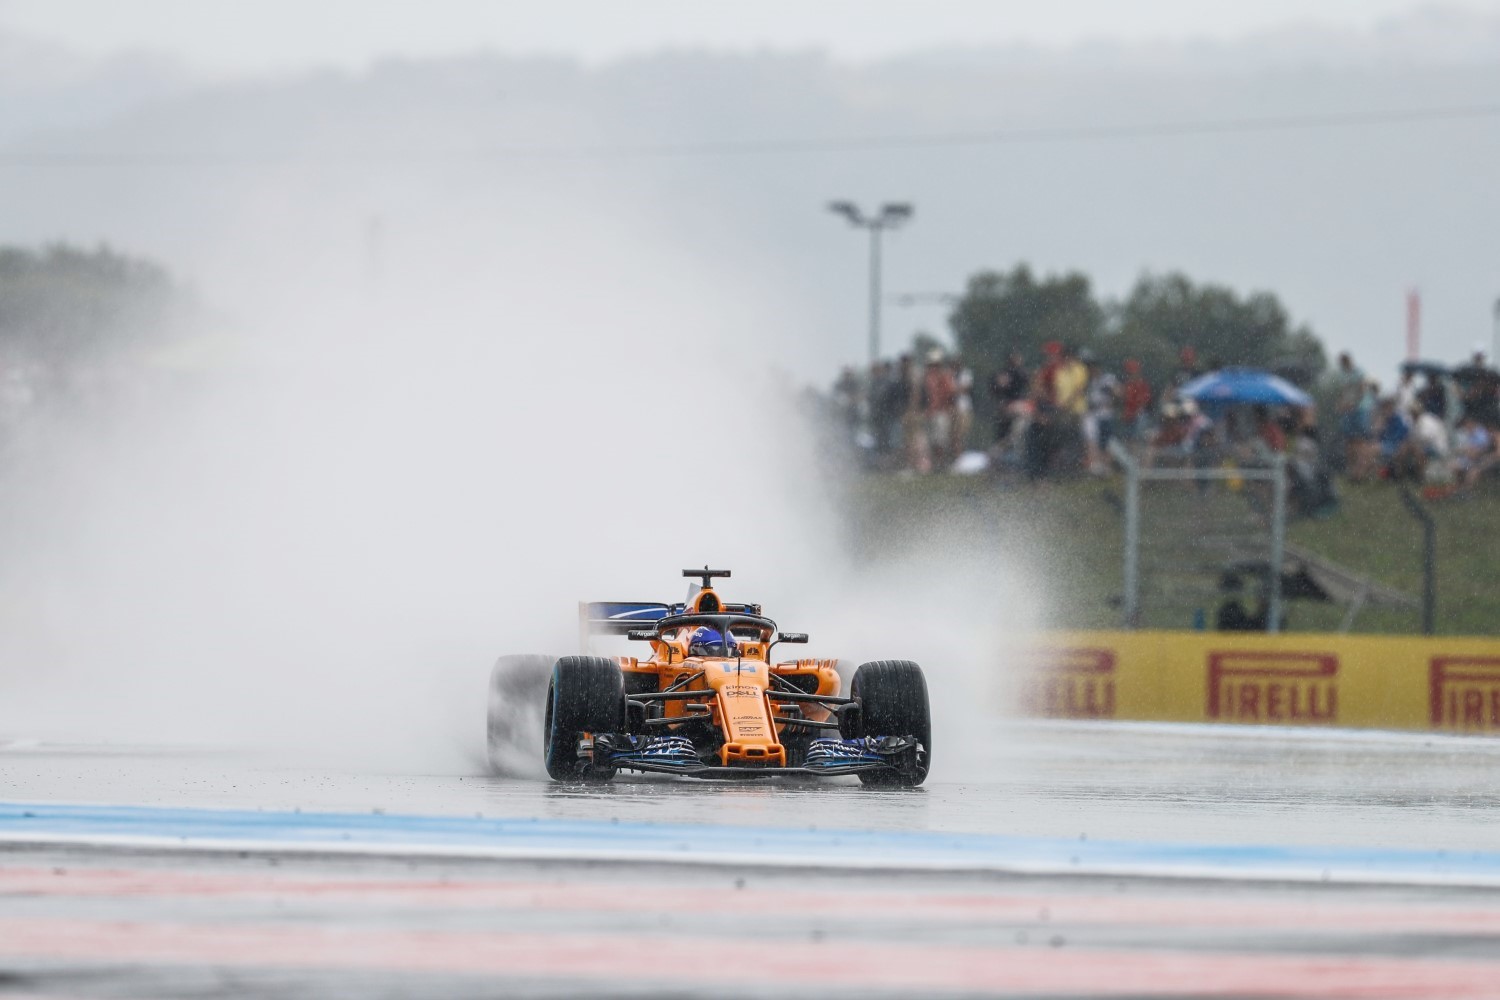 Alonso in the rain at Paul Ricard Saturday. He does not want to race anymore for a backmarker team like McLaren